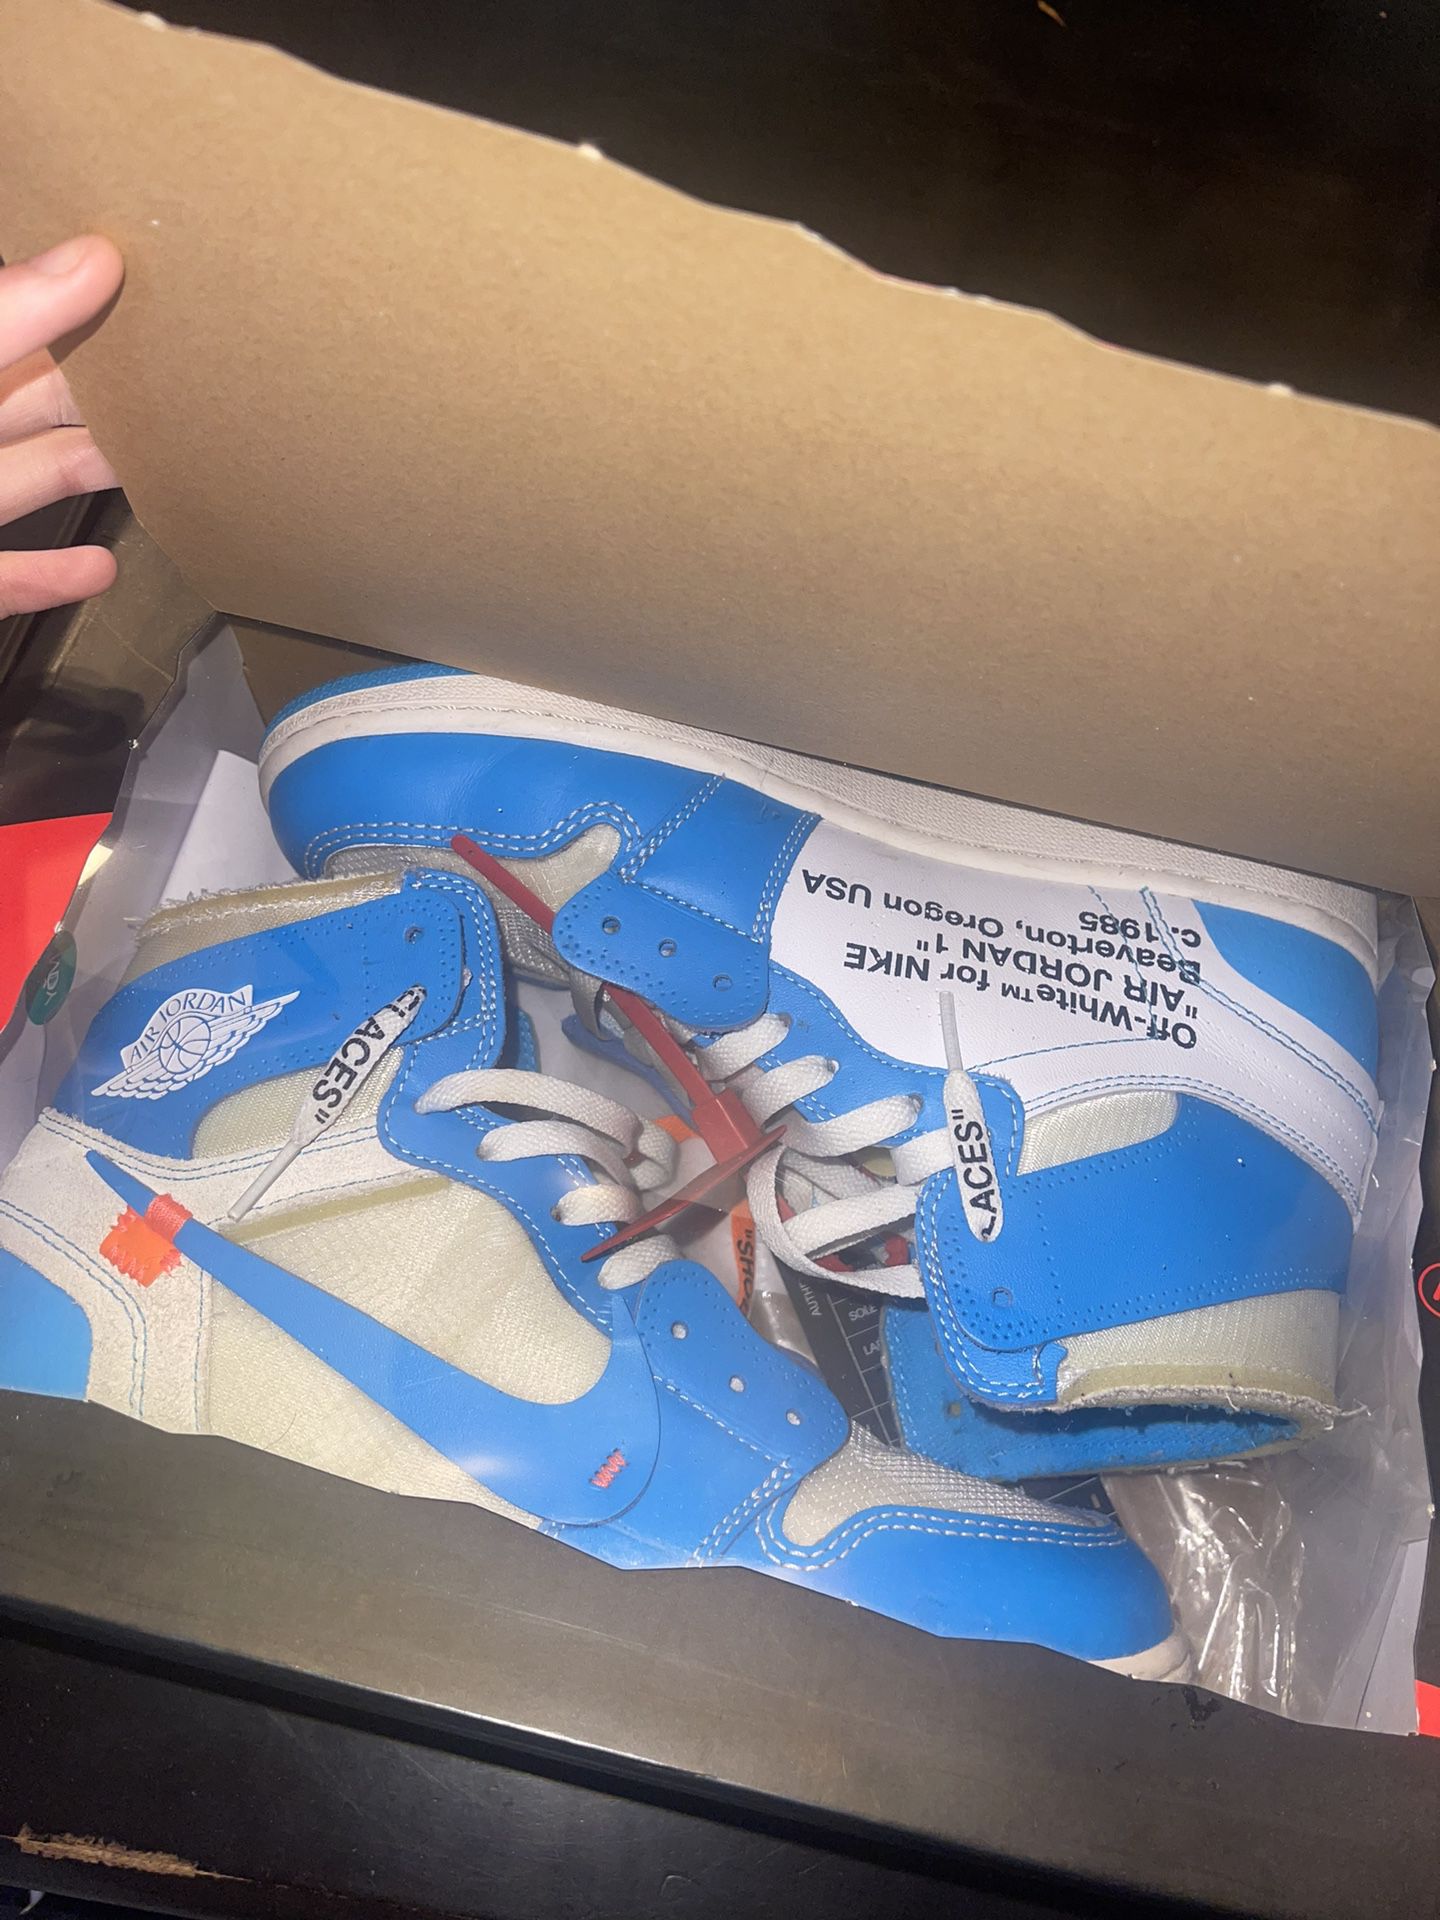 OFF WHITE UNC 1s For Sale/Trades for Sale in New Phila, PA - OfferUp